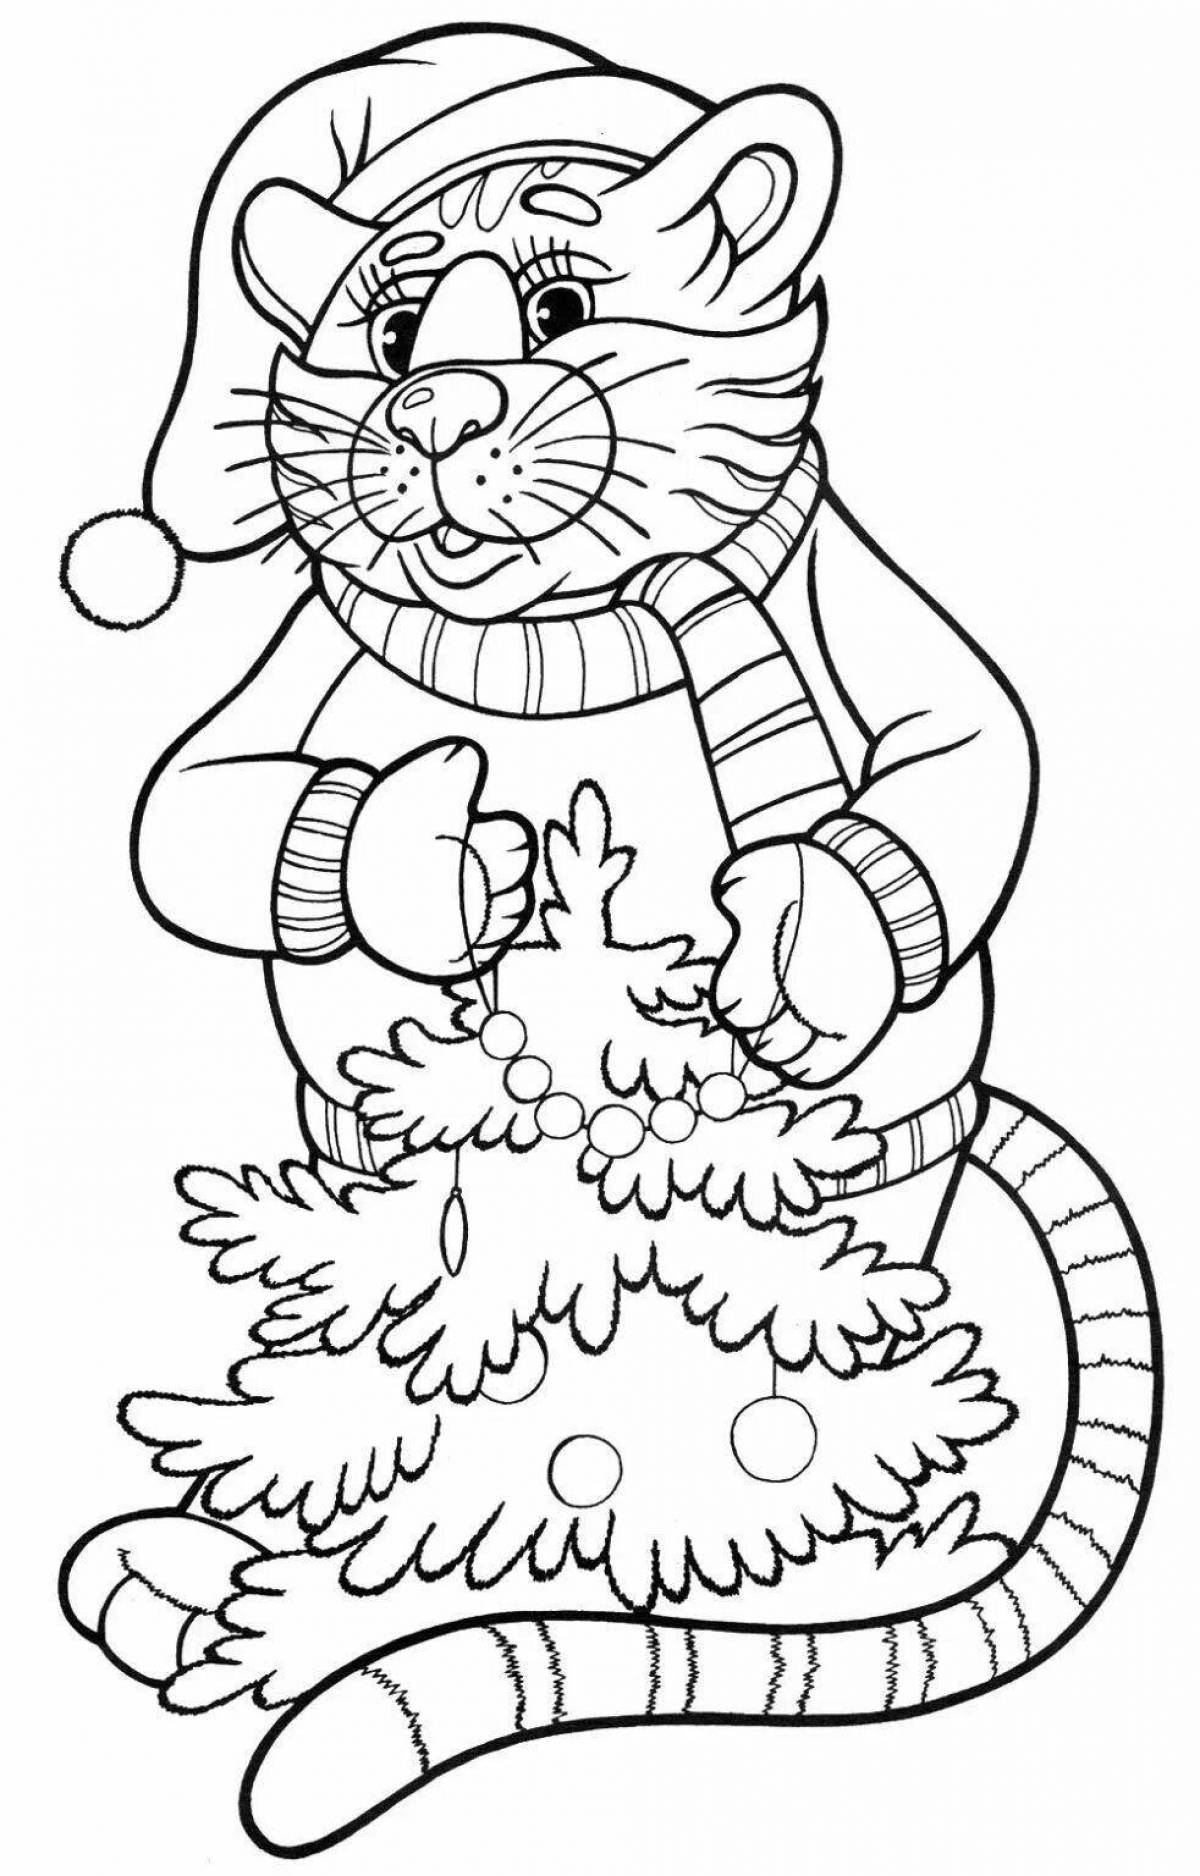 Colorful and detailed Christmas coloring book